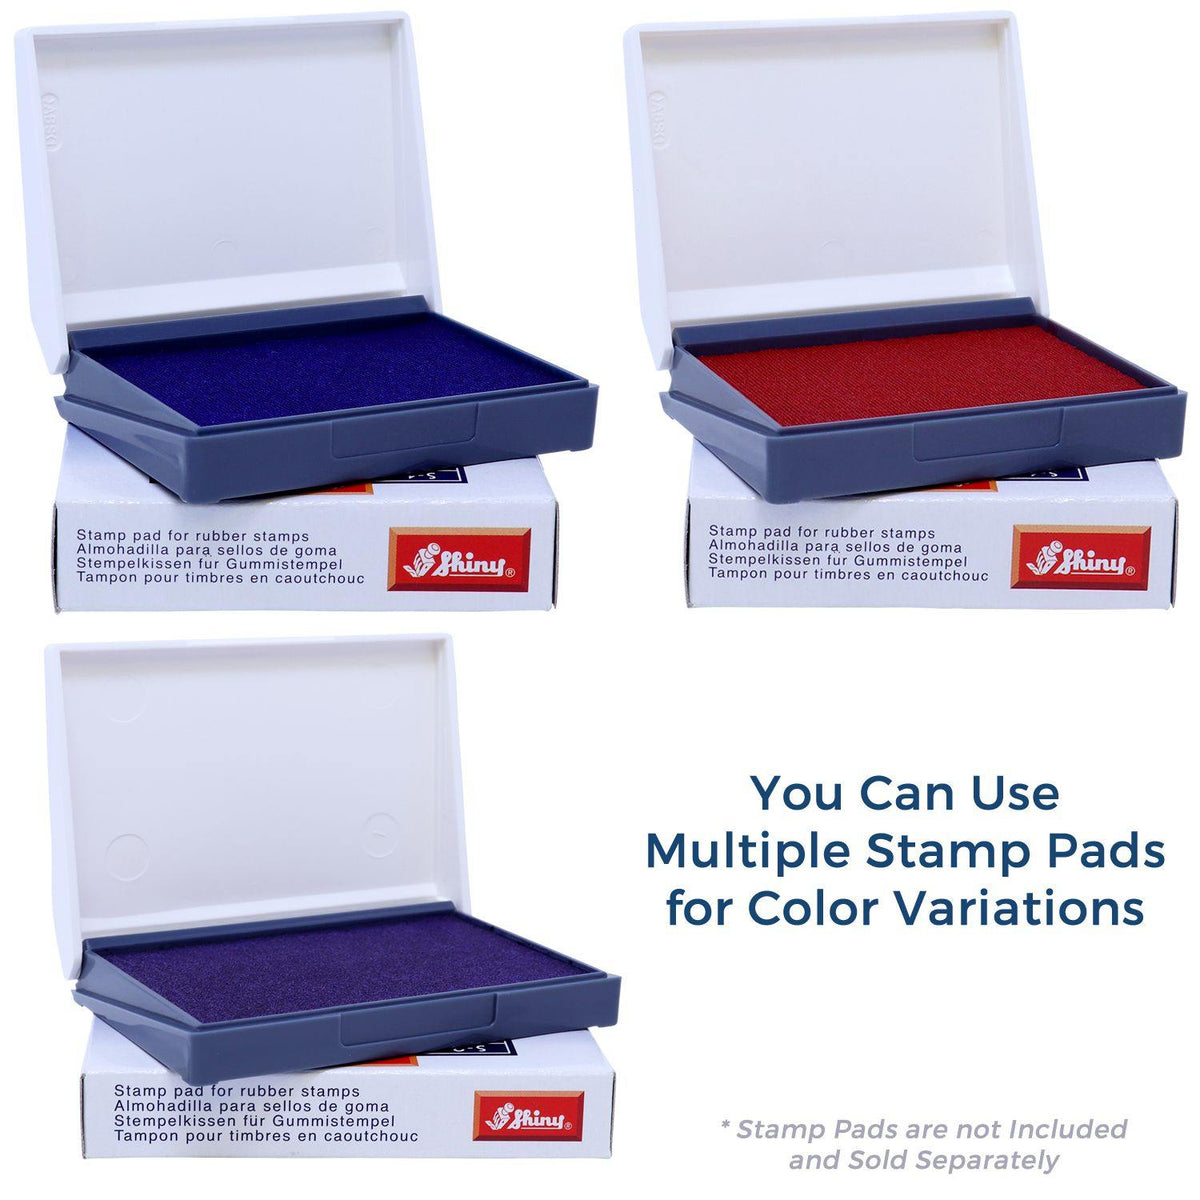 Stamp Pads for Large Personal Confidential Rubber Stamp Available